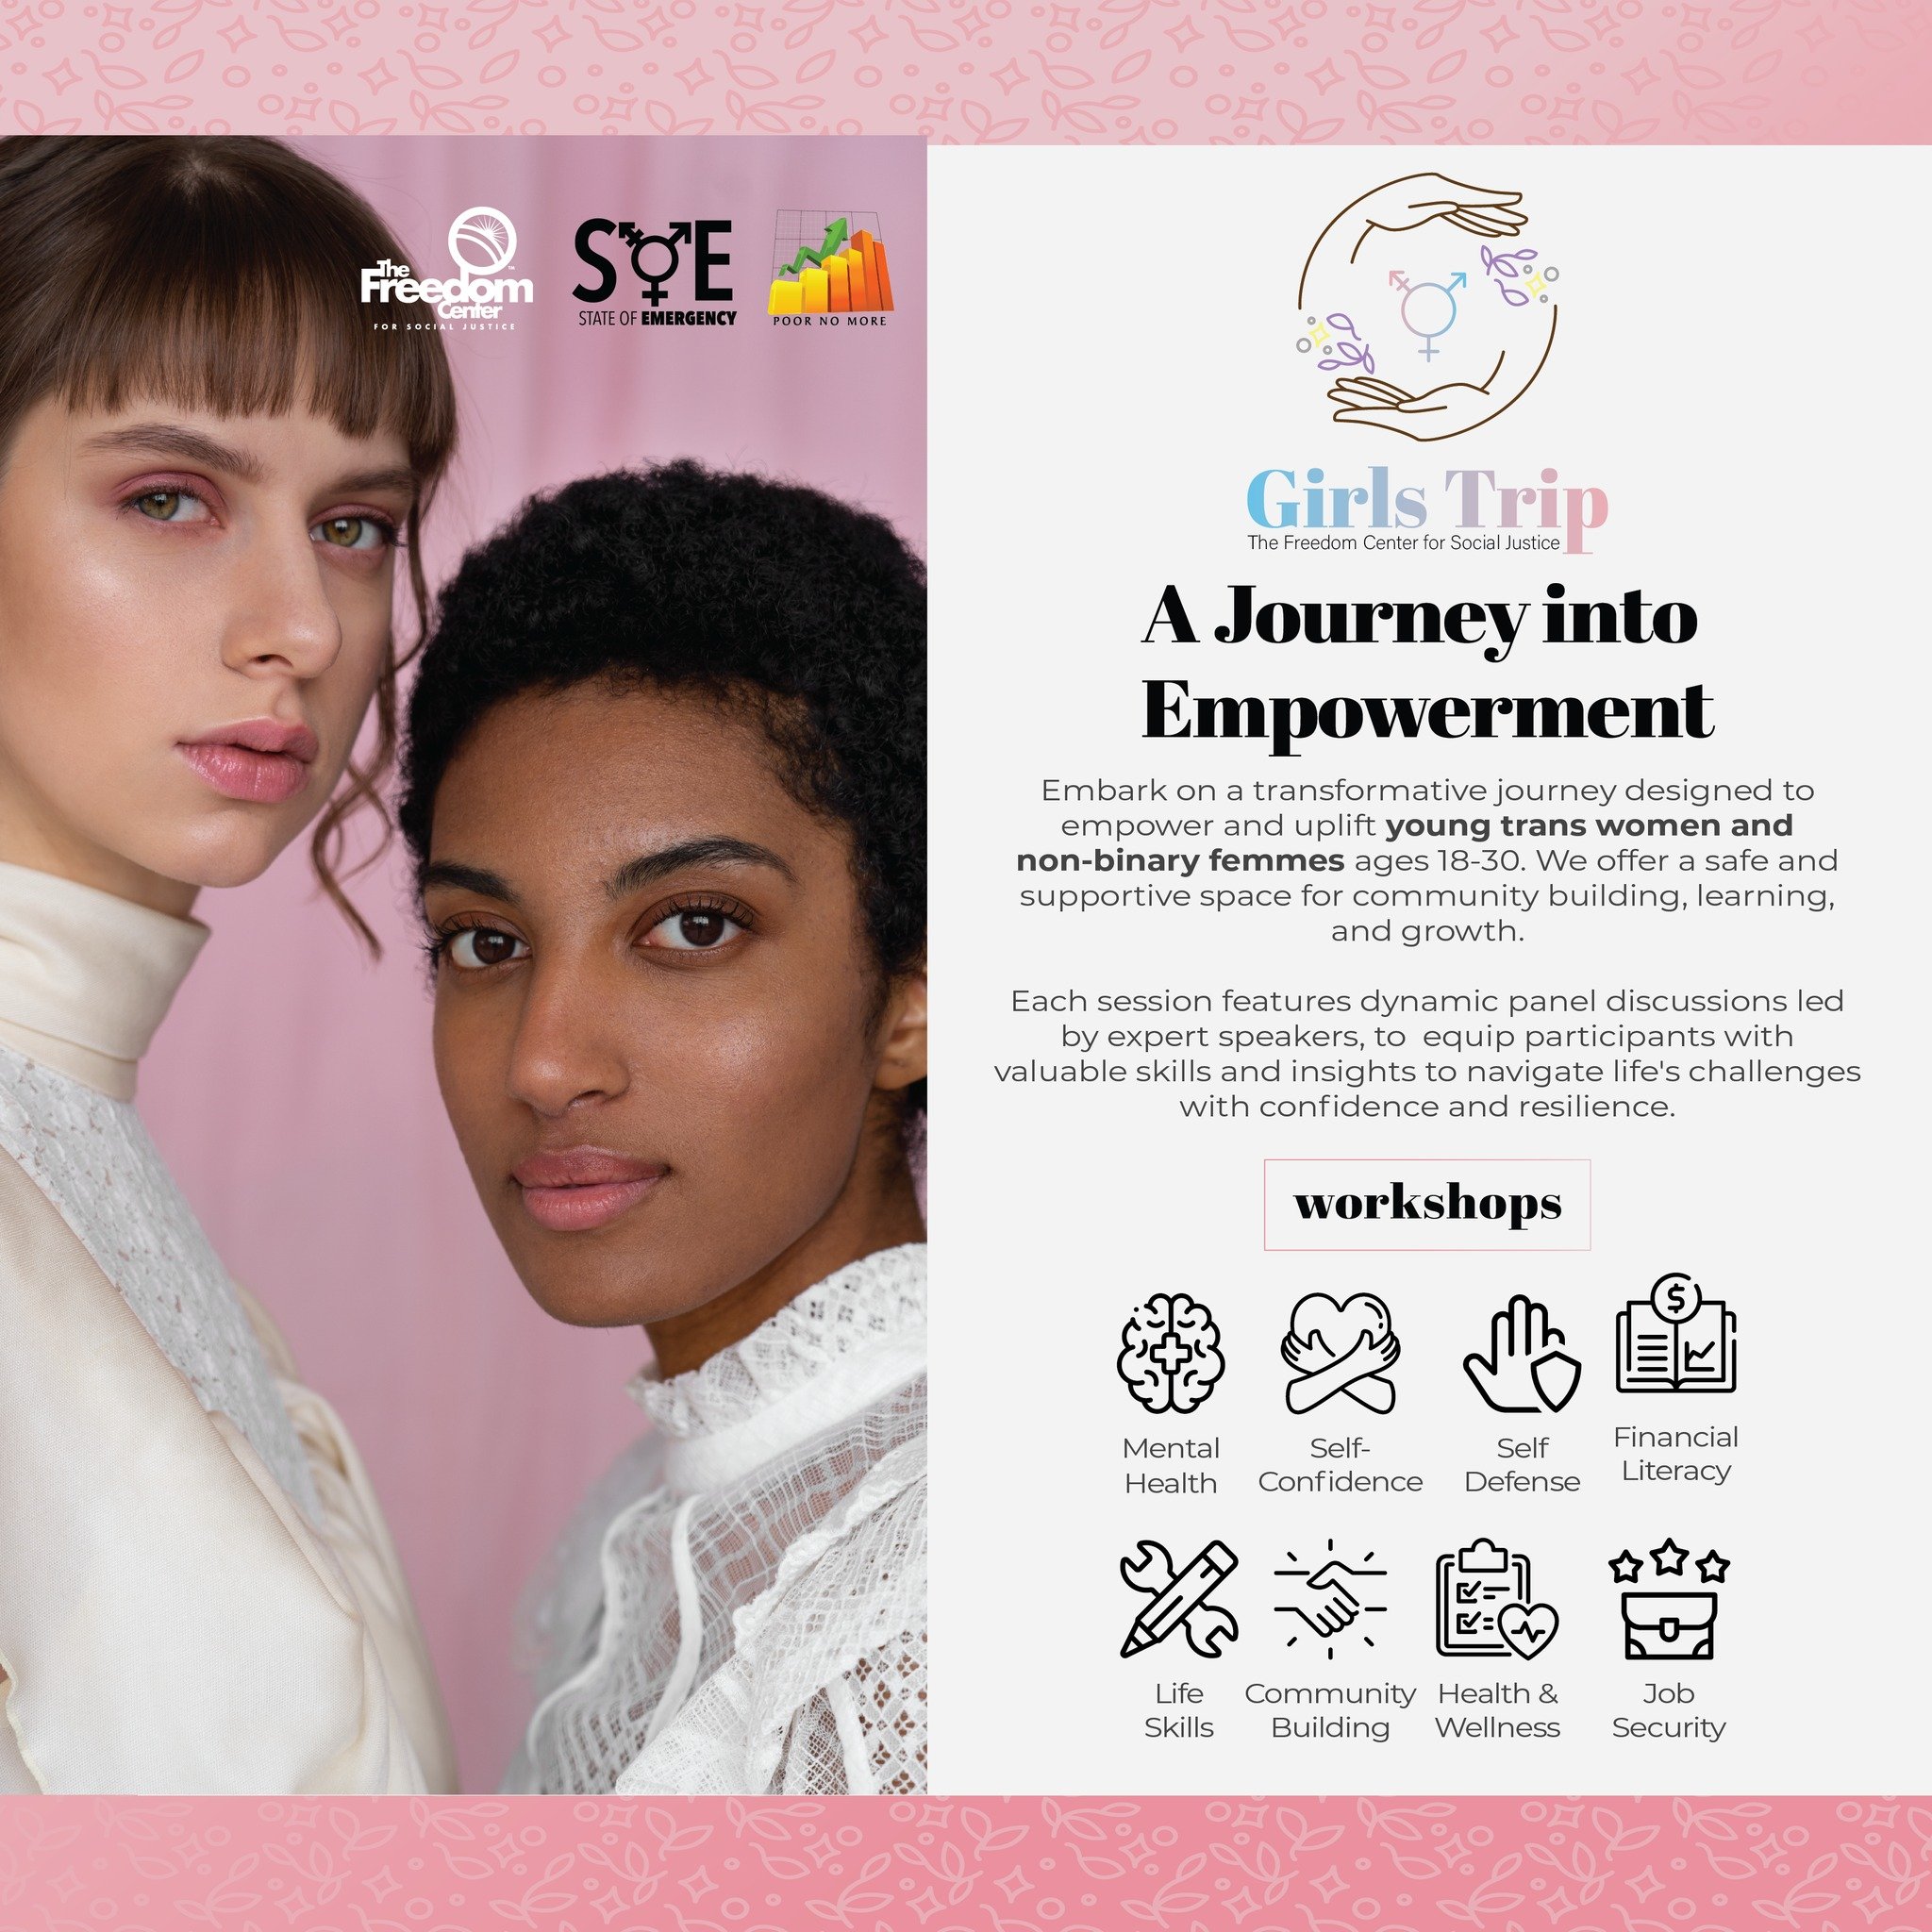 🏳️&zwj;⚧️ Embark on a transformative journey with our Girls Trip event, designed for young trans women and non-binary femmes aged 18-30. Join us for a series of sessions throughout the year, in partnership with @poornomorecharlotte  and @st.ofemerge